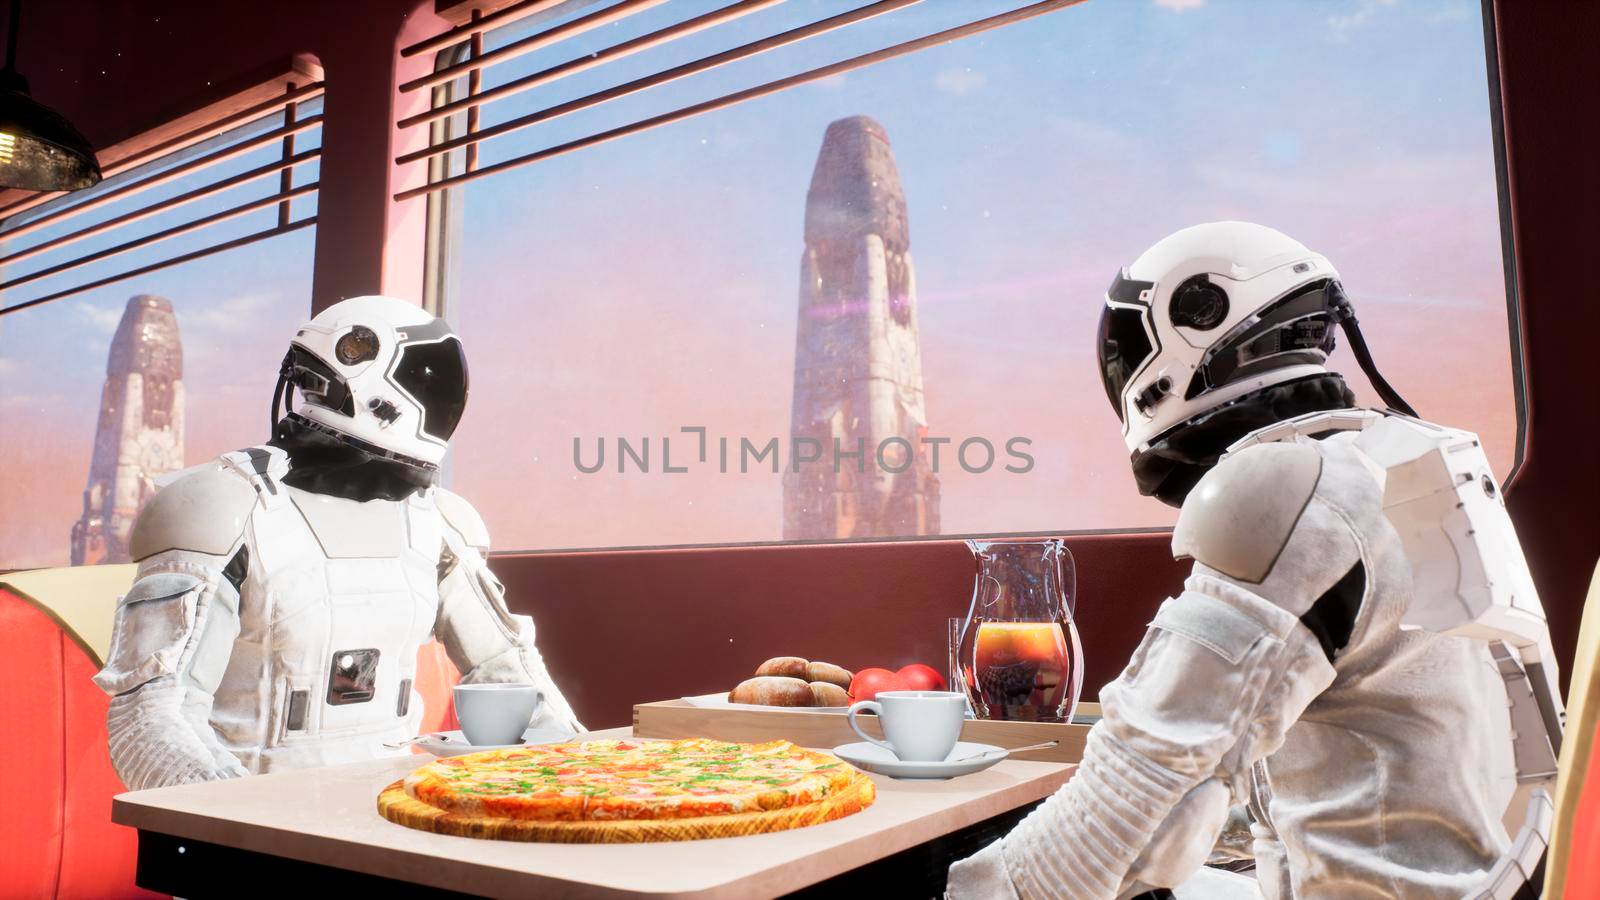 On a distant red planet, astronauts have lunch at a local eatery. 3D Rendering. by designprojects